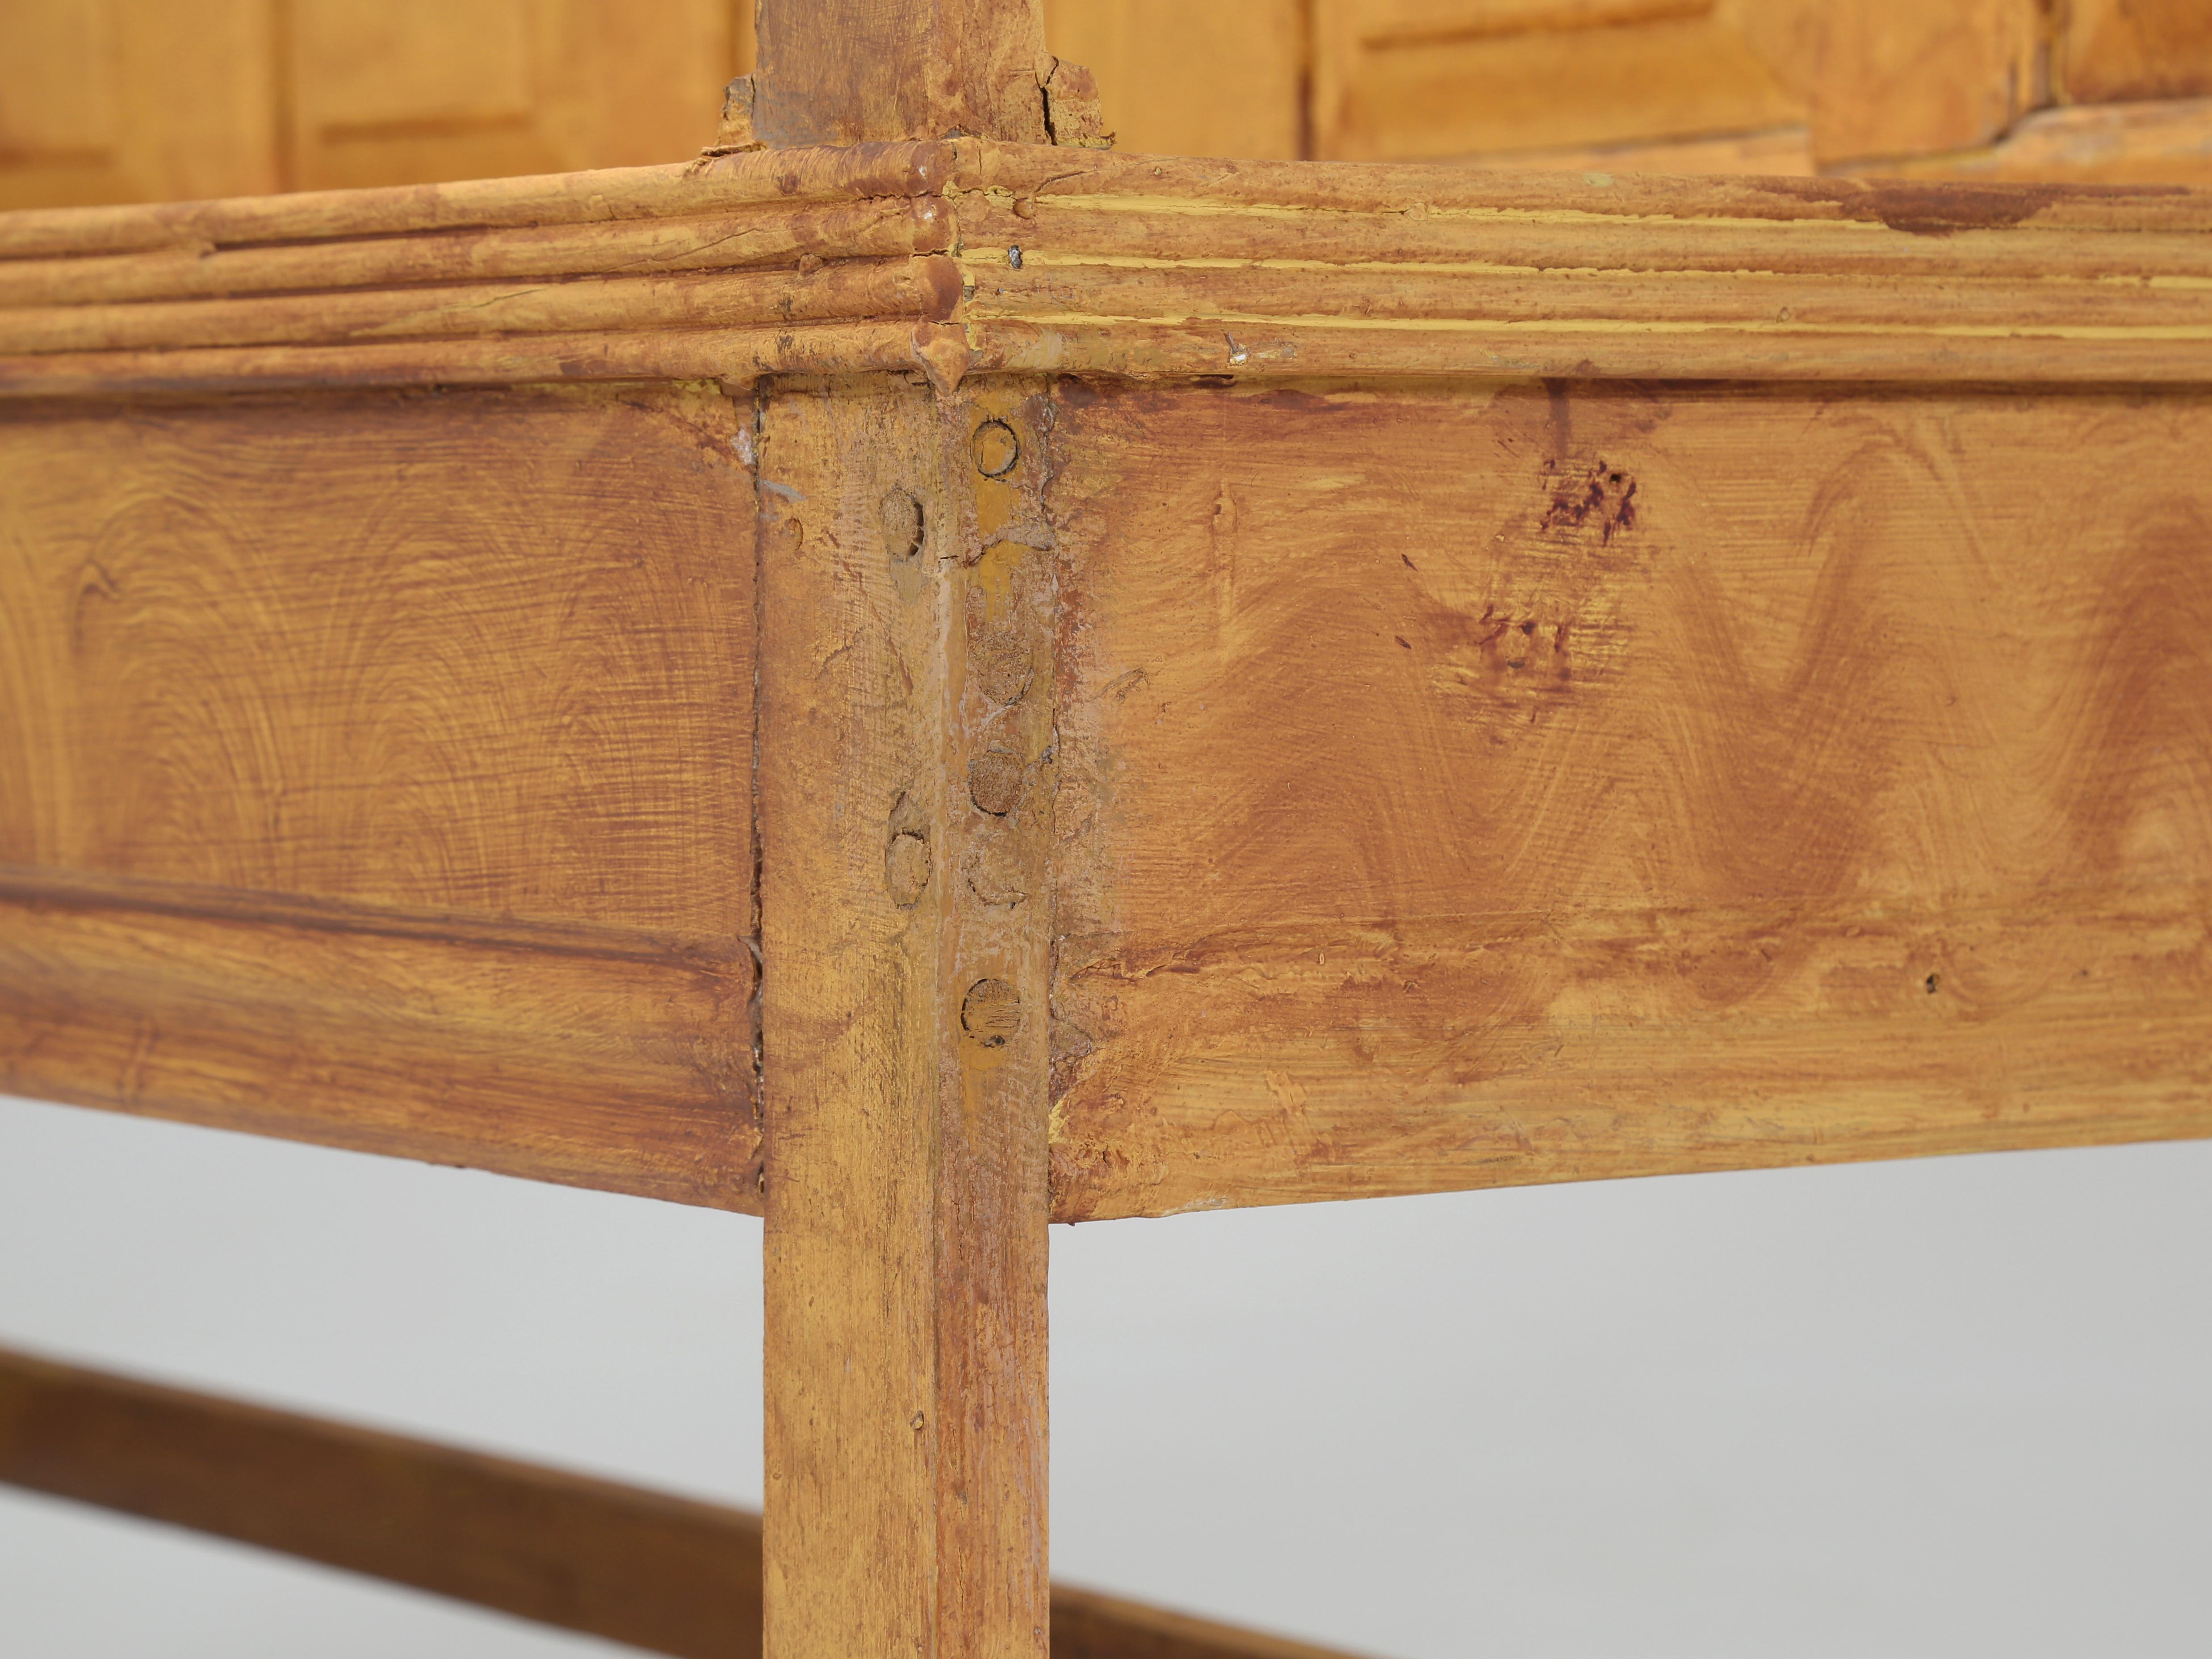 Antique Irish Pine Bench in an Old Scumbled Painted Finish Late 1800's Original For Sale 9